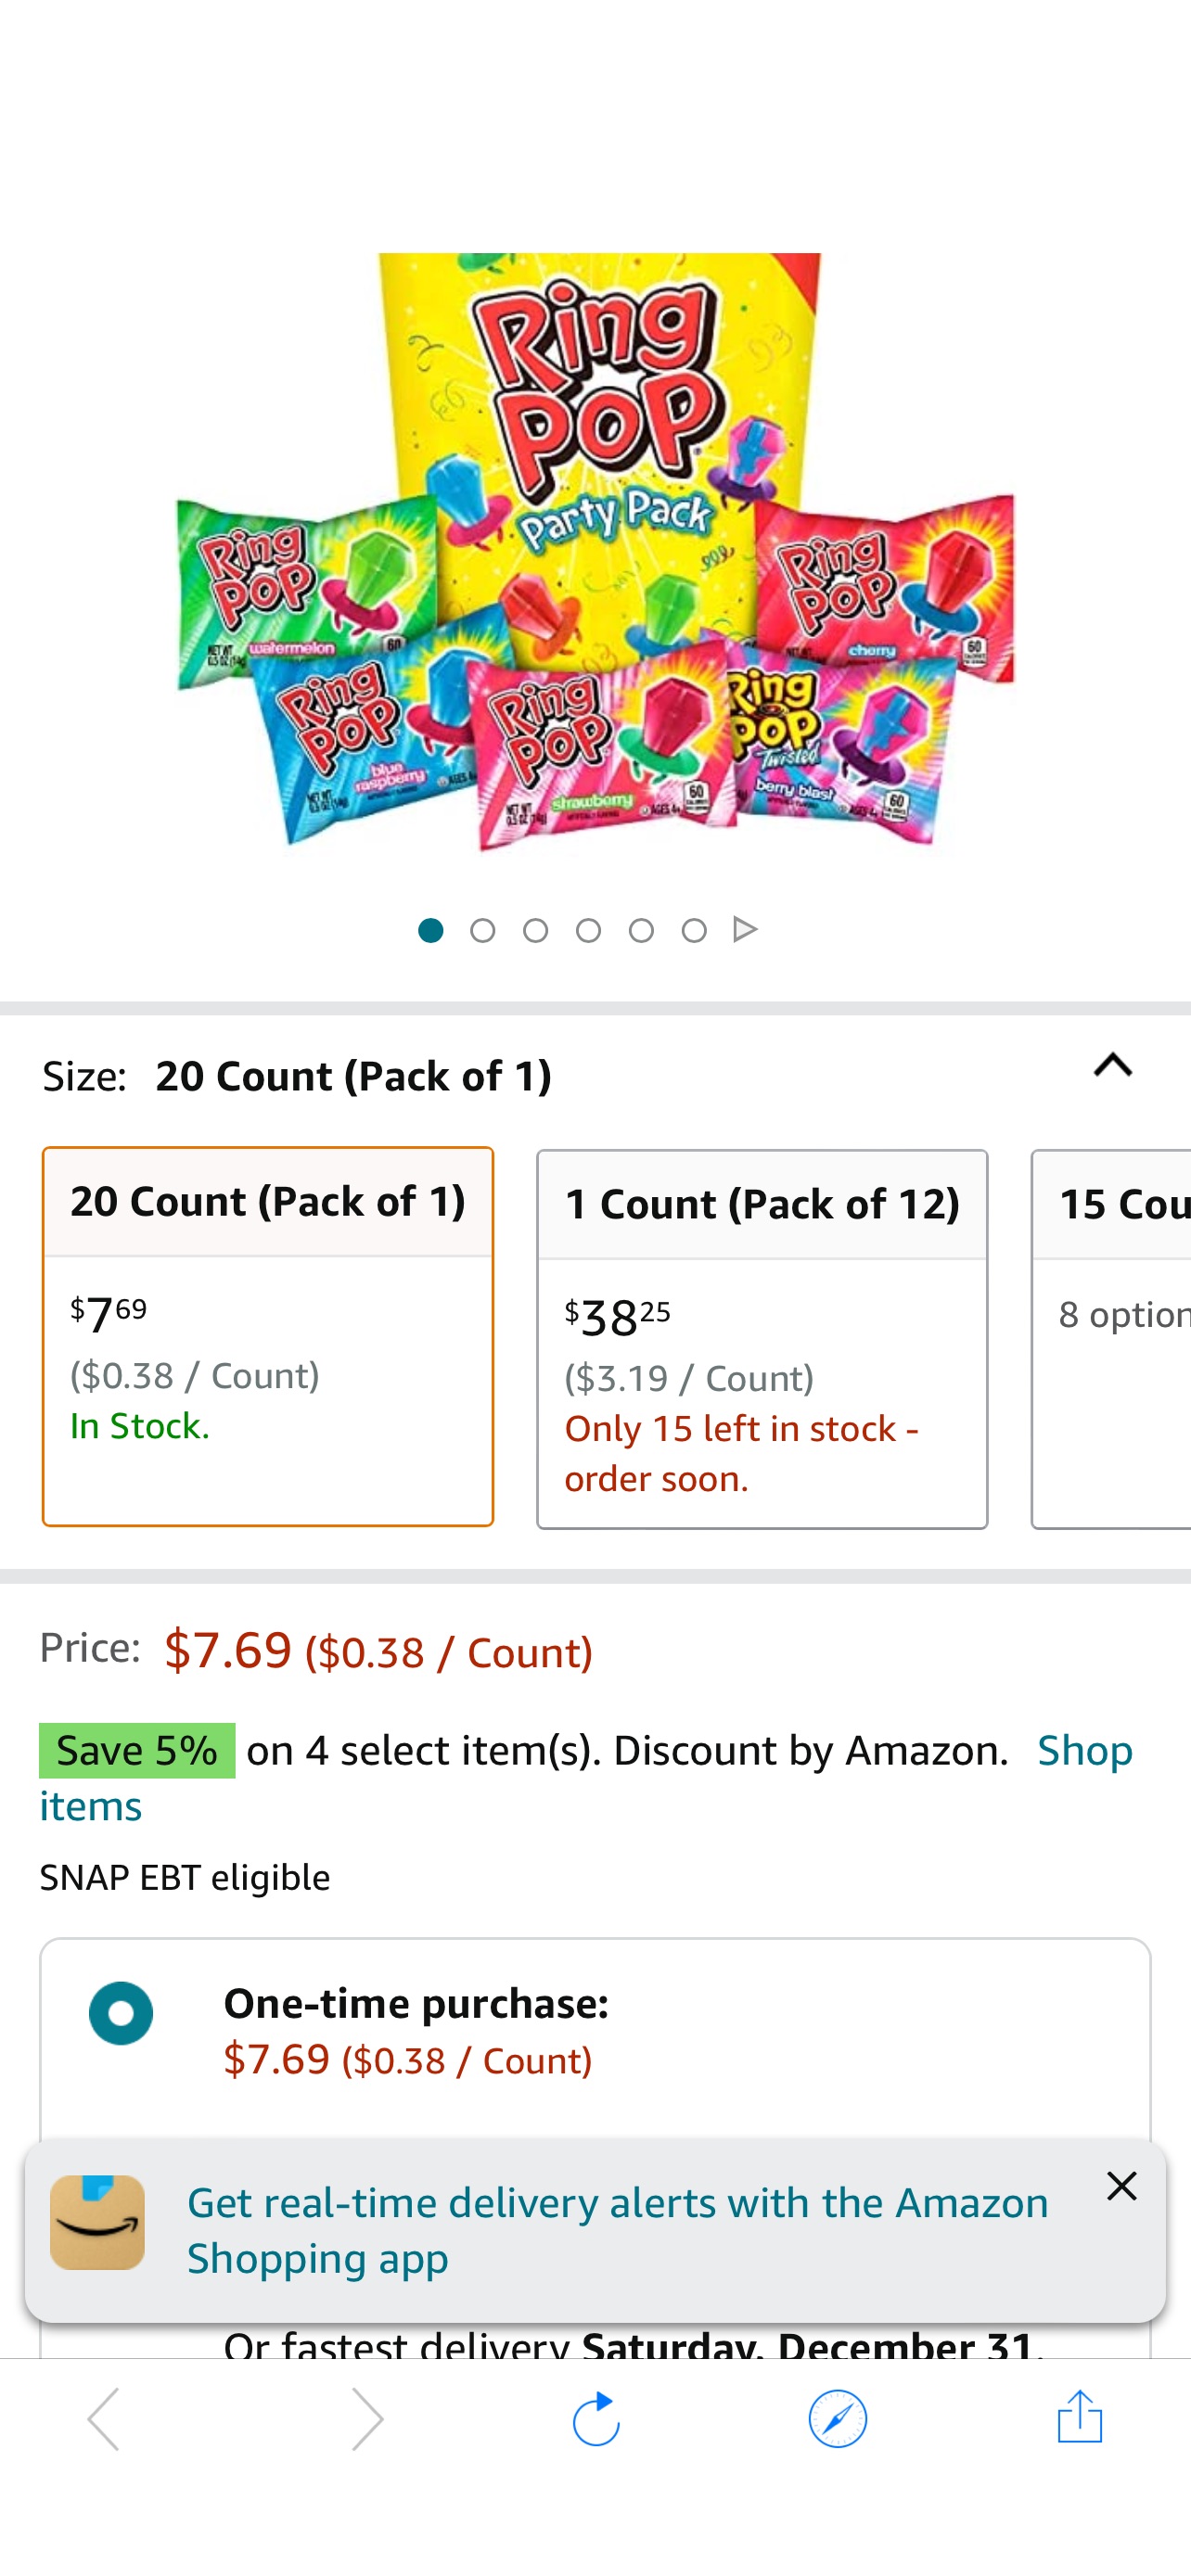 Amazon.com : Ring Pop Individually Wrapped Bulk 20 Count Lollipop Variety Christmas Holiday Party Pack